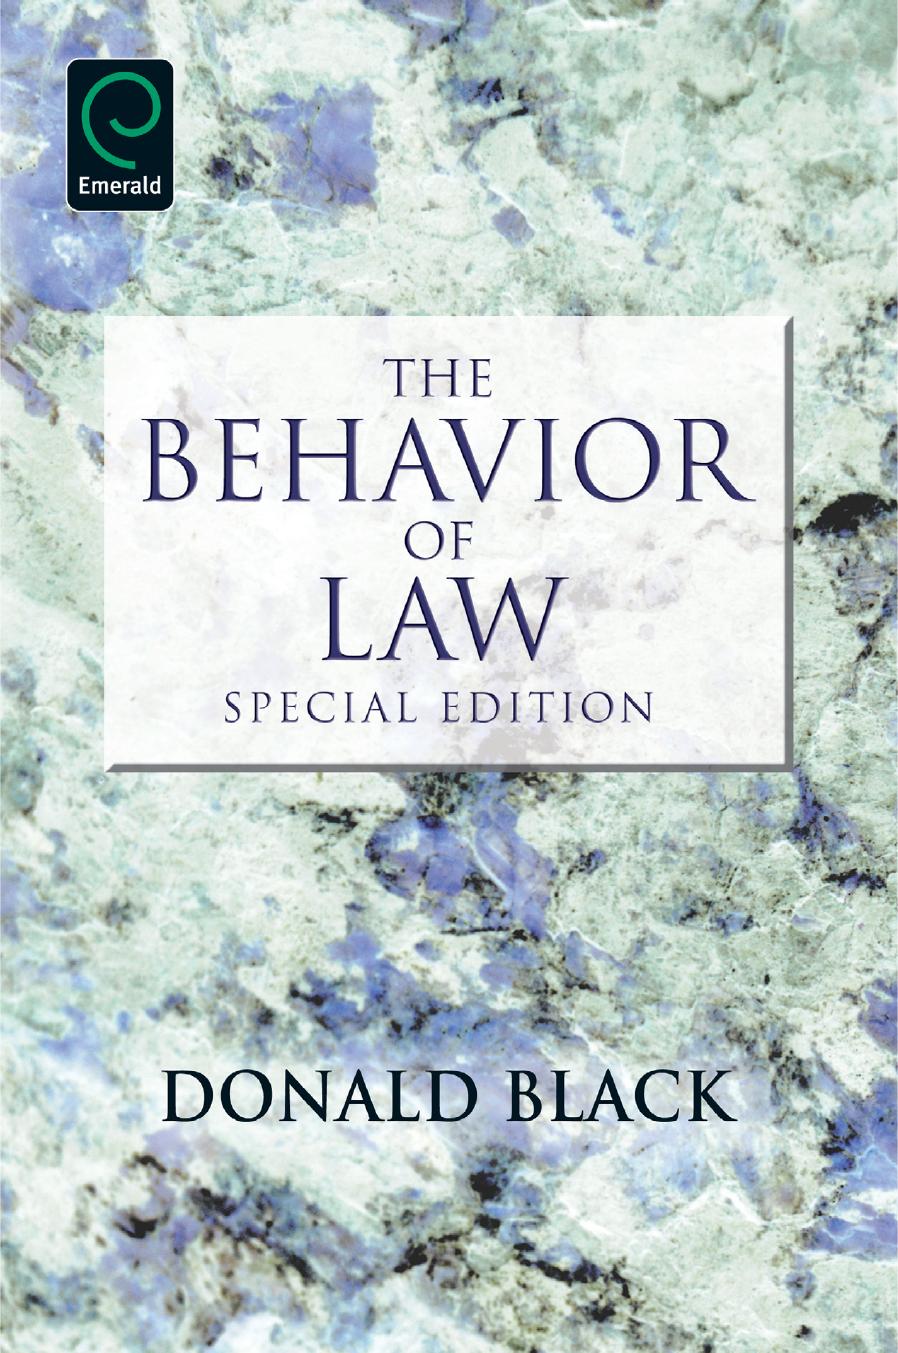 The Behavior of Law - Special Edition by Donald Black